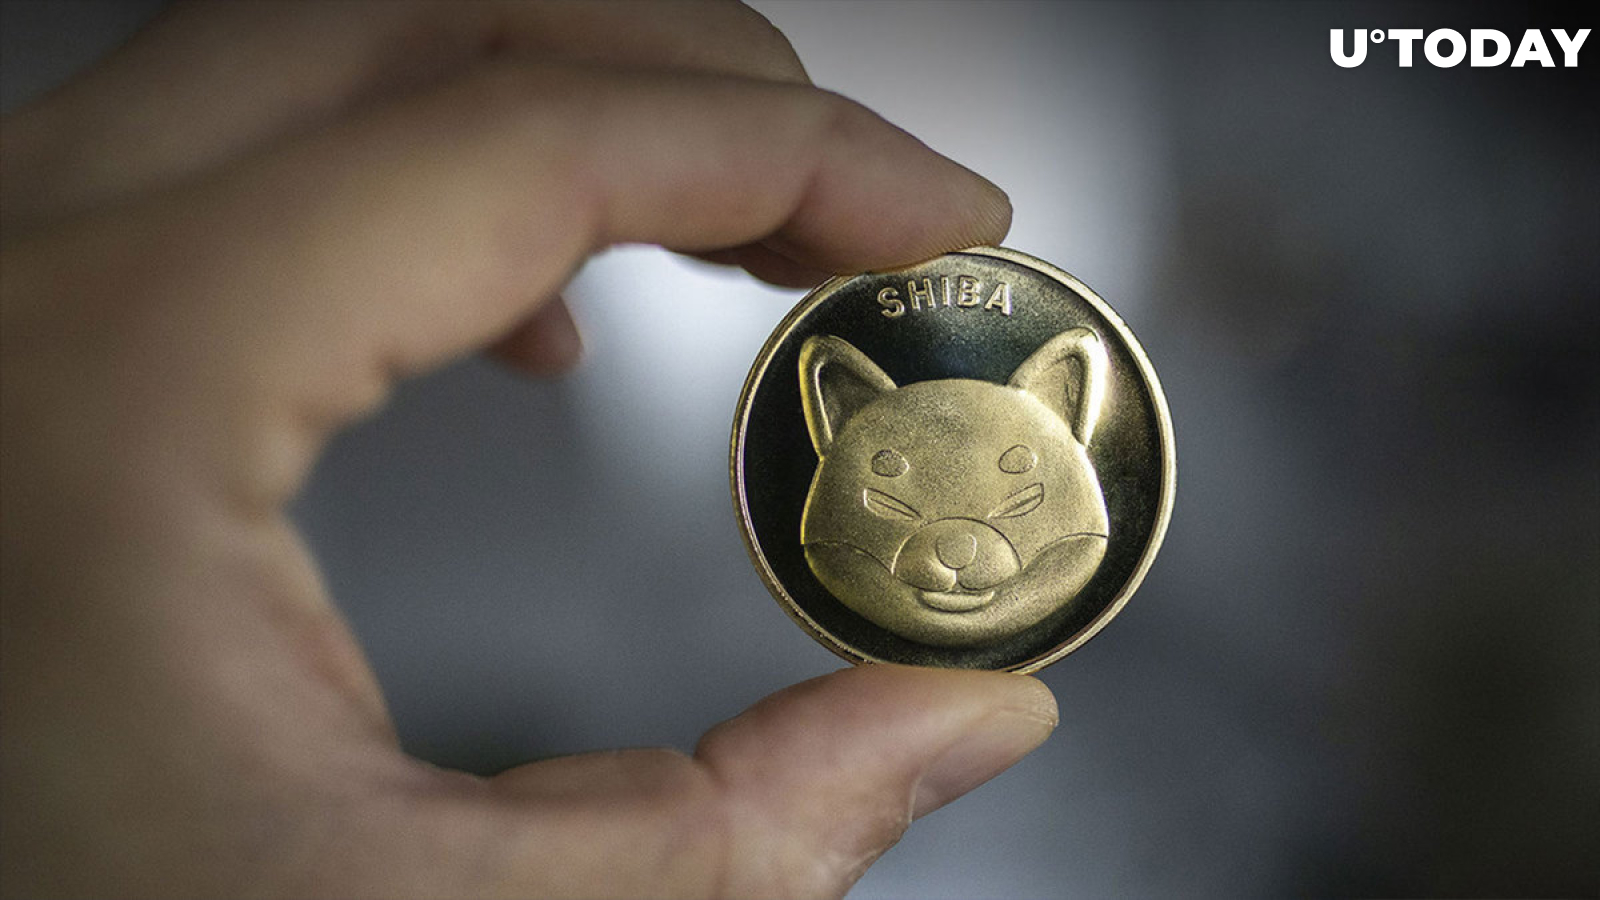 Shiba Inu's Profitability at 13%, Here's What Happens If It Drops Below 10%